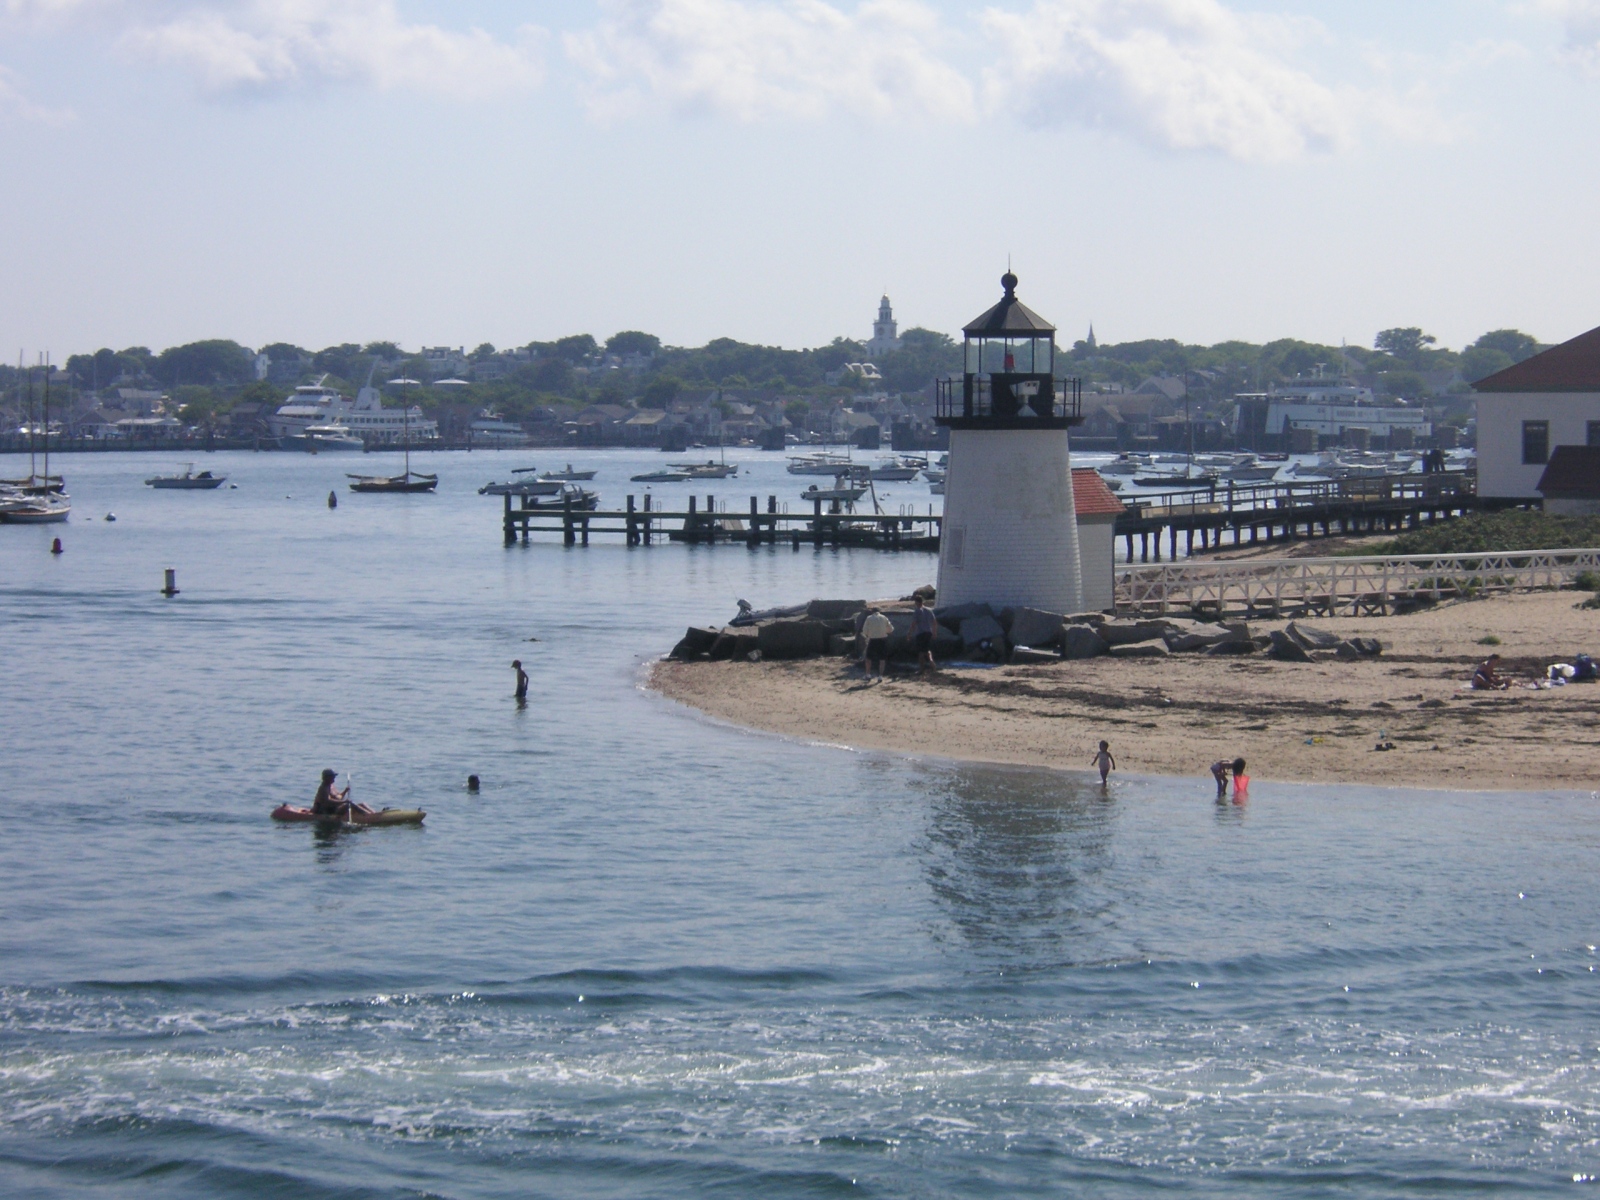 At the Water's Edge - View of Brant Point from Fast Ferry, Nantucket,...